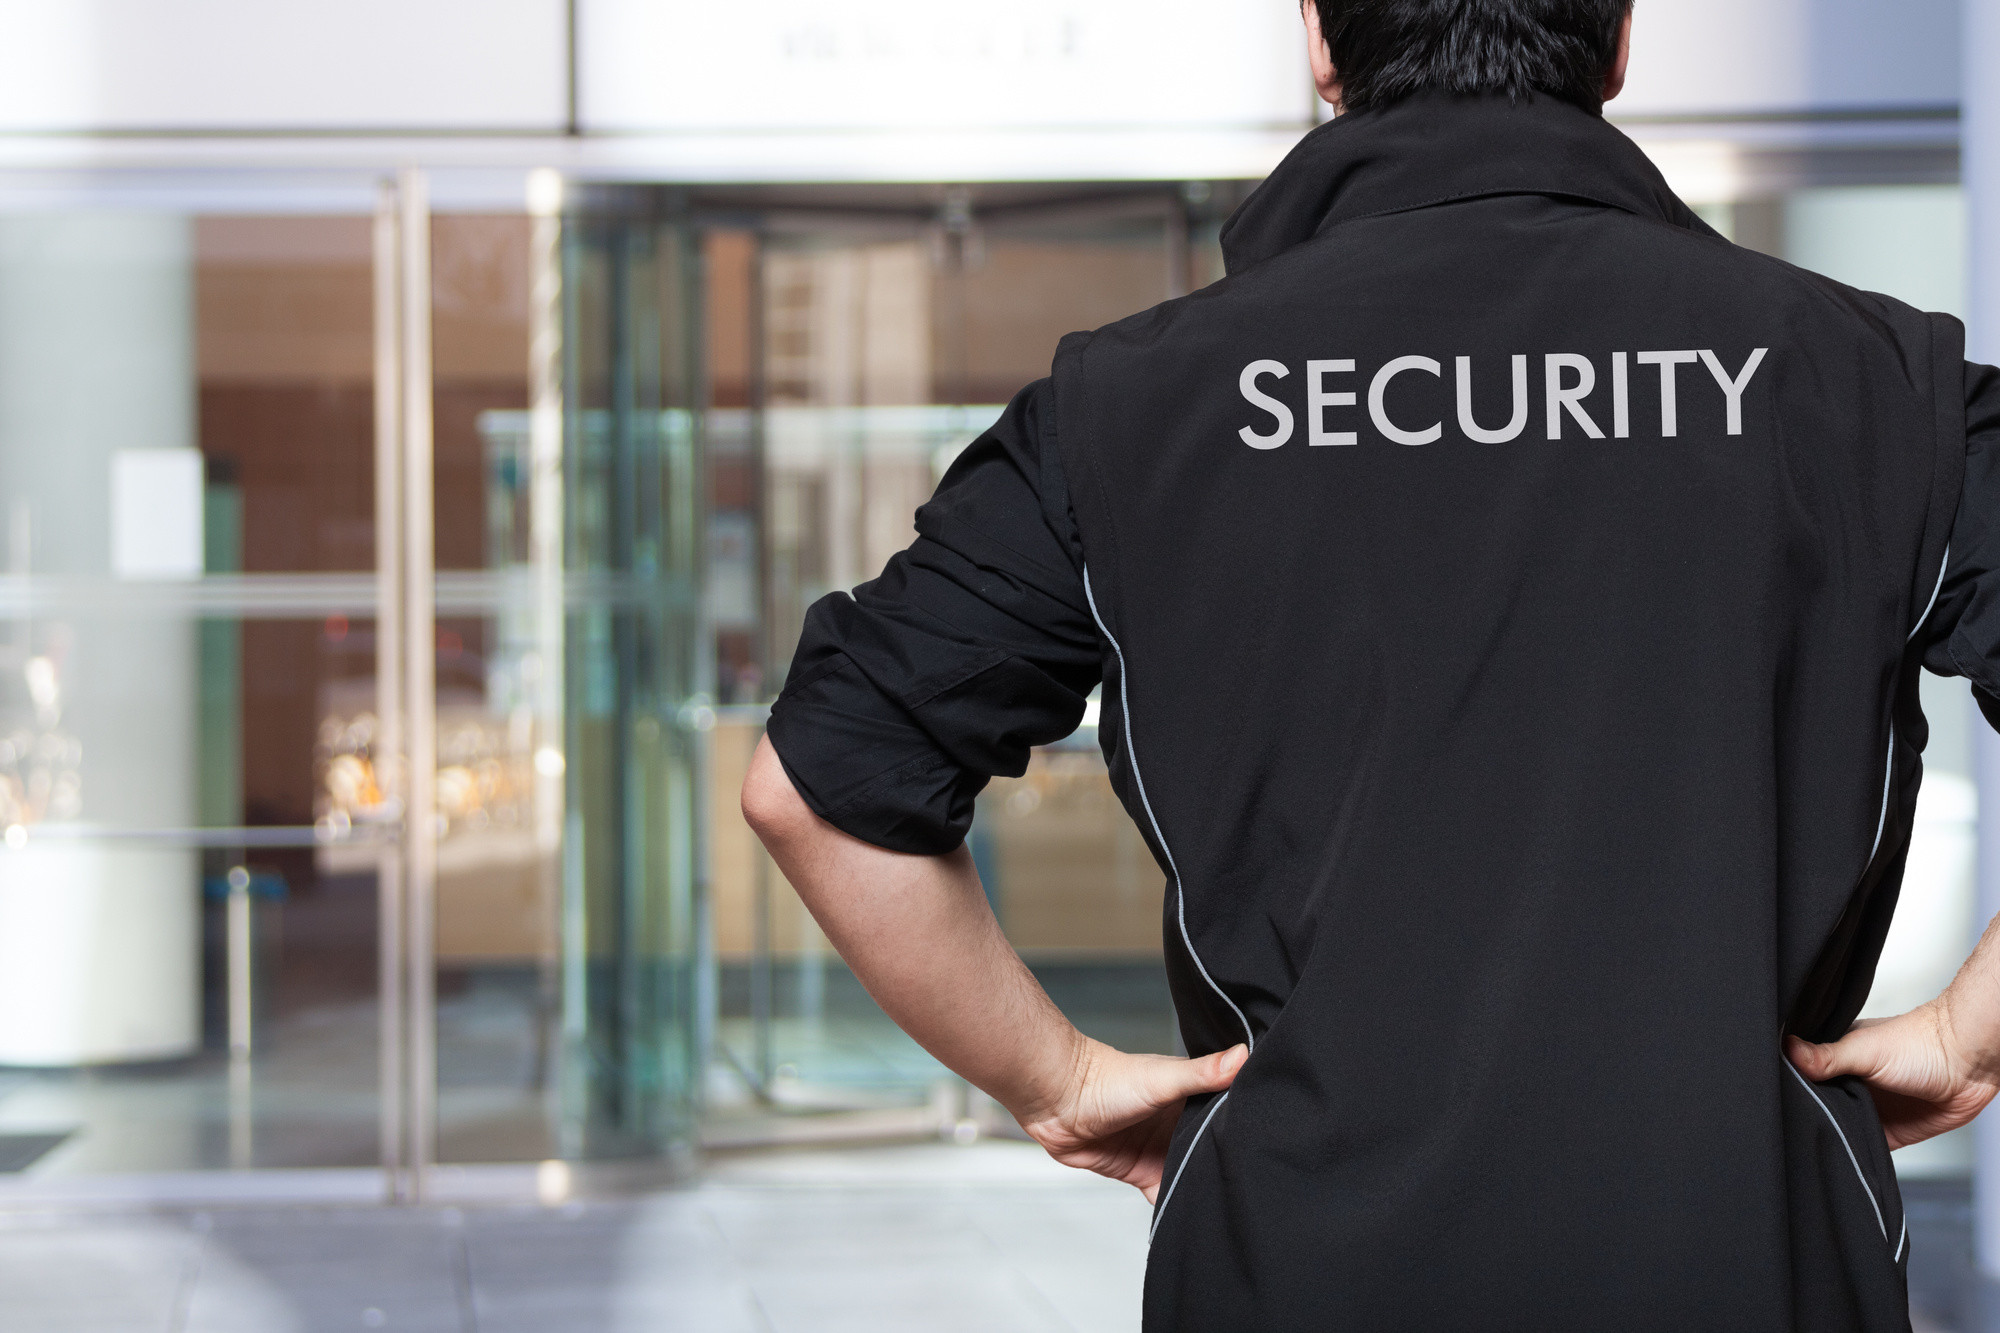 S4SECURITAS PVT LTD - Latest update - BEST SKILLED PROPERTY SECURITY GUARDS IN BANGALORE